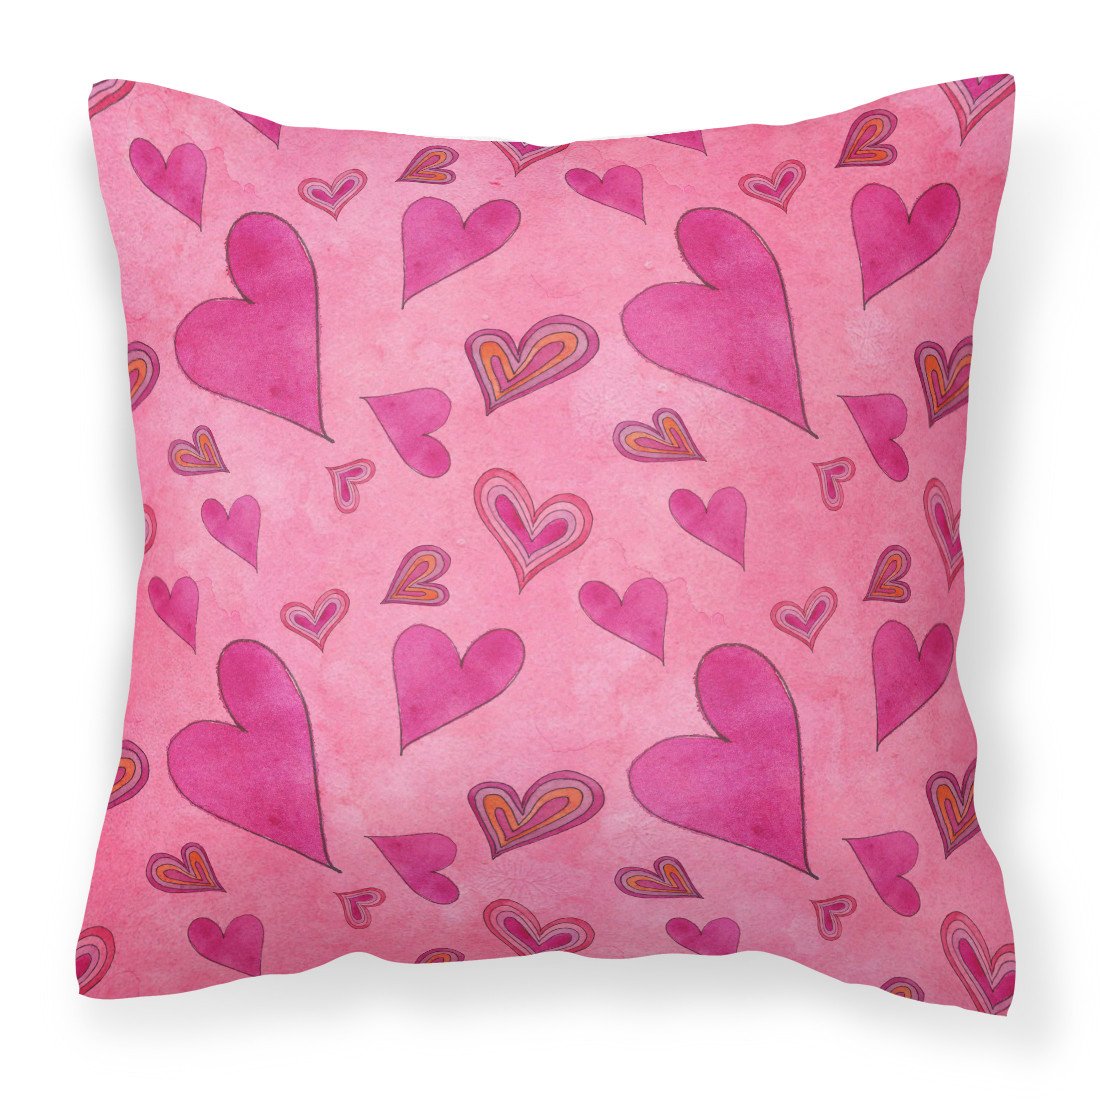 Watercolor Love and Hearts Fabric Decorative Pillow BB7550PW1818 by Caroline's Treasures